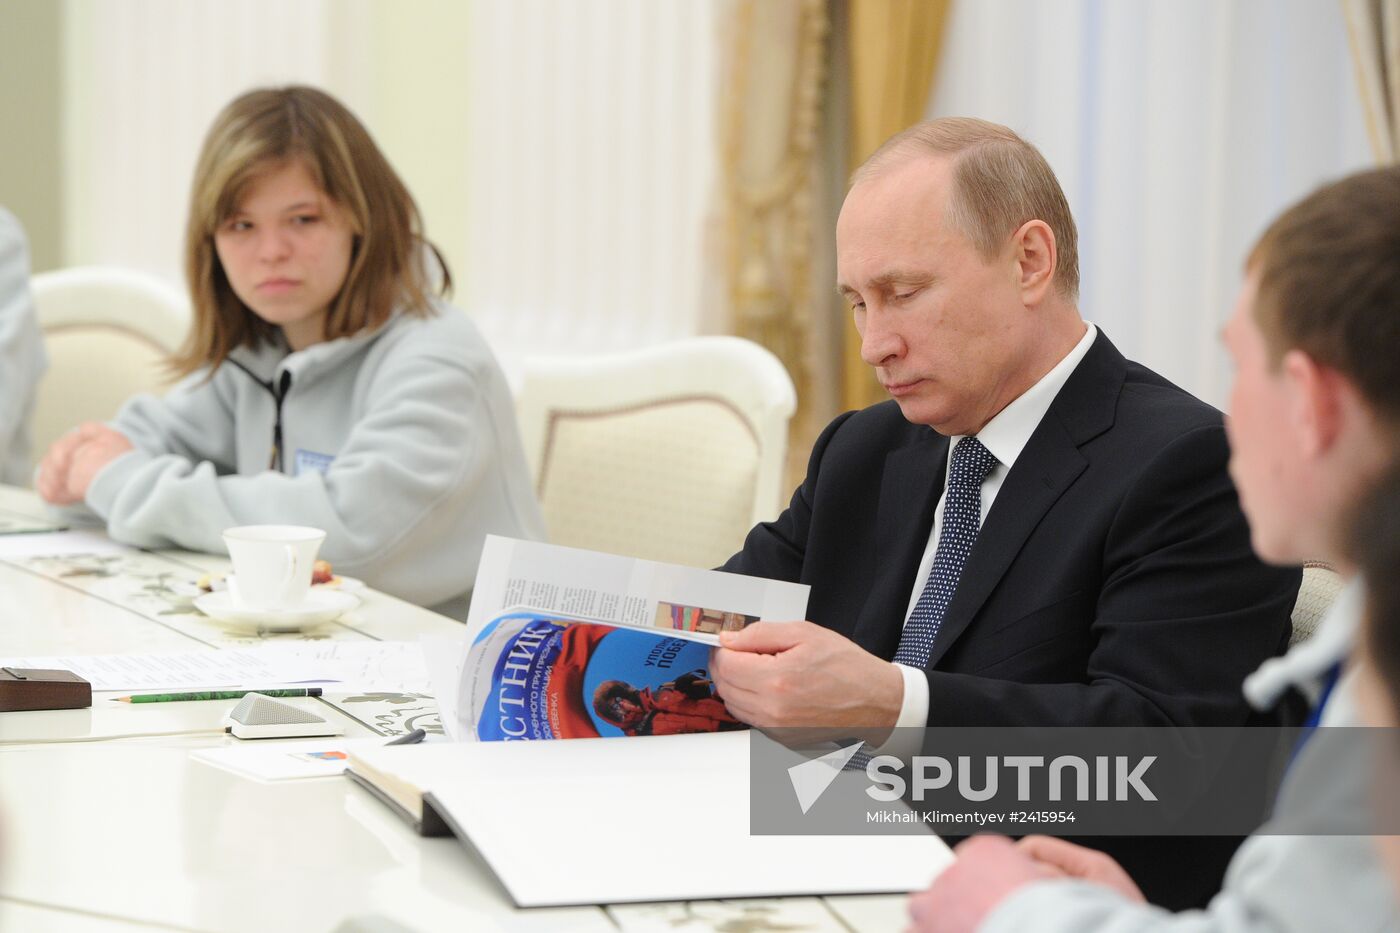 Vladimir Putin meets with participants in children's ski expedition to the North Pole